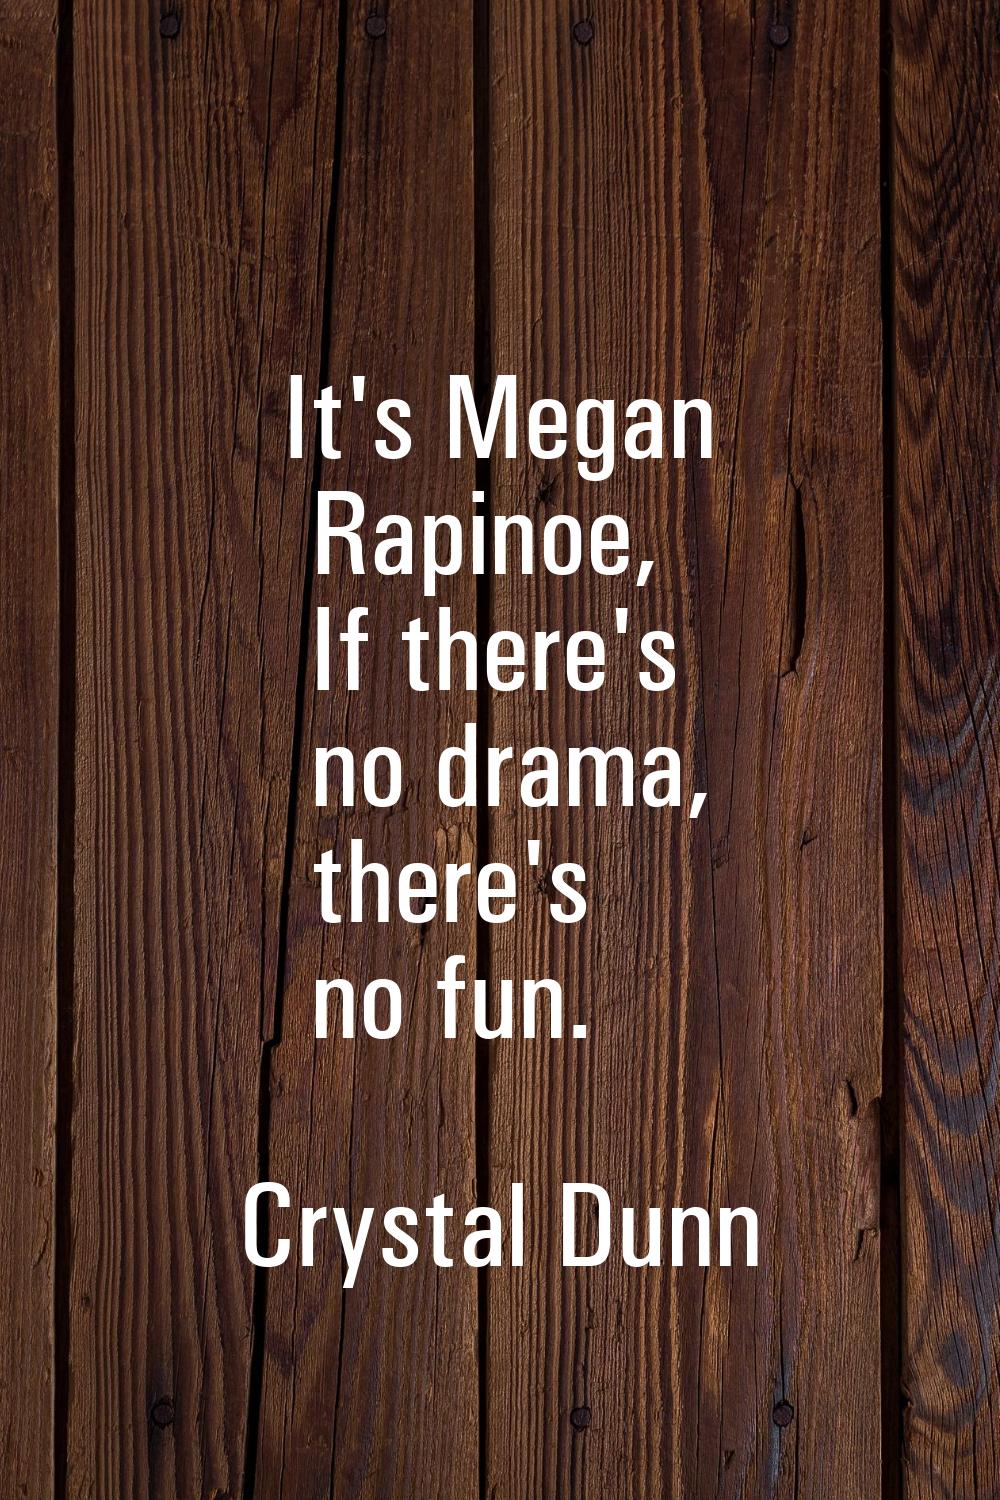 It's Megan Rapinoe, If there's no drama, there's no fun.